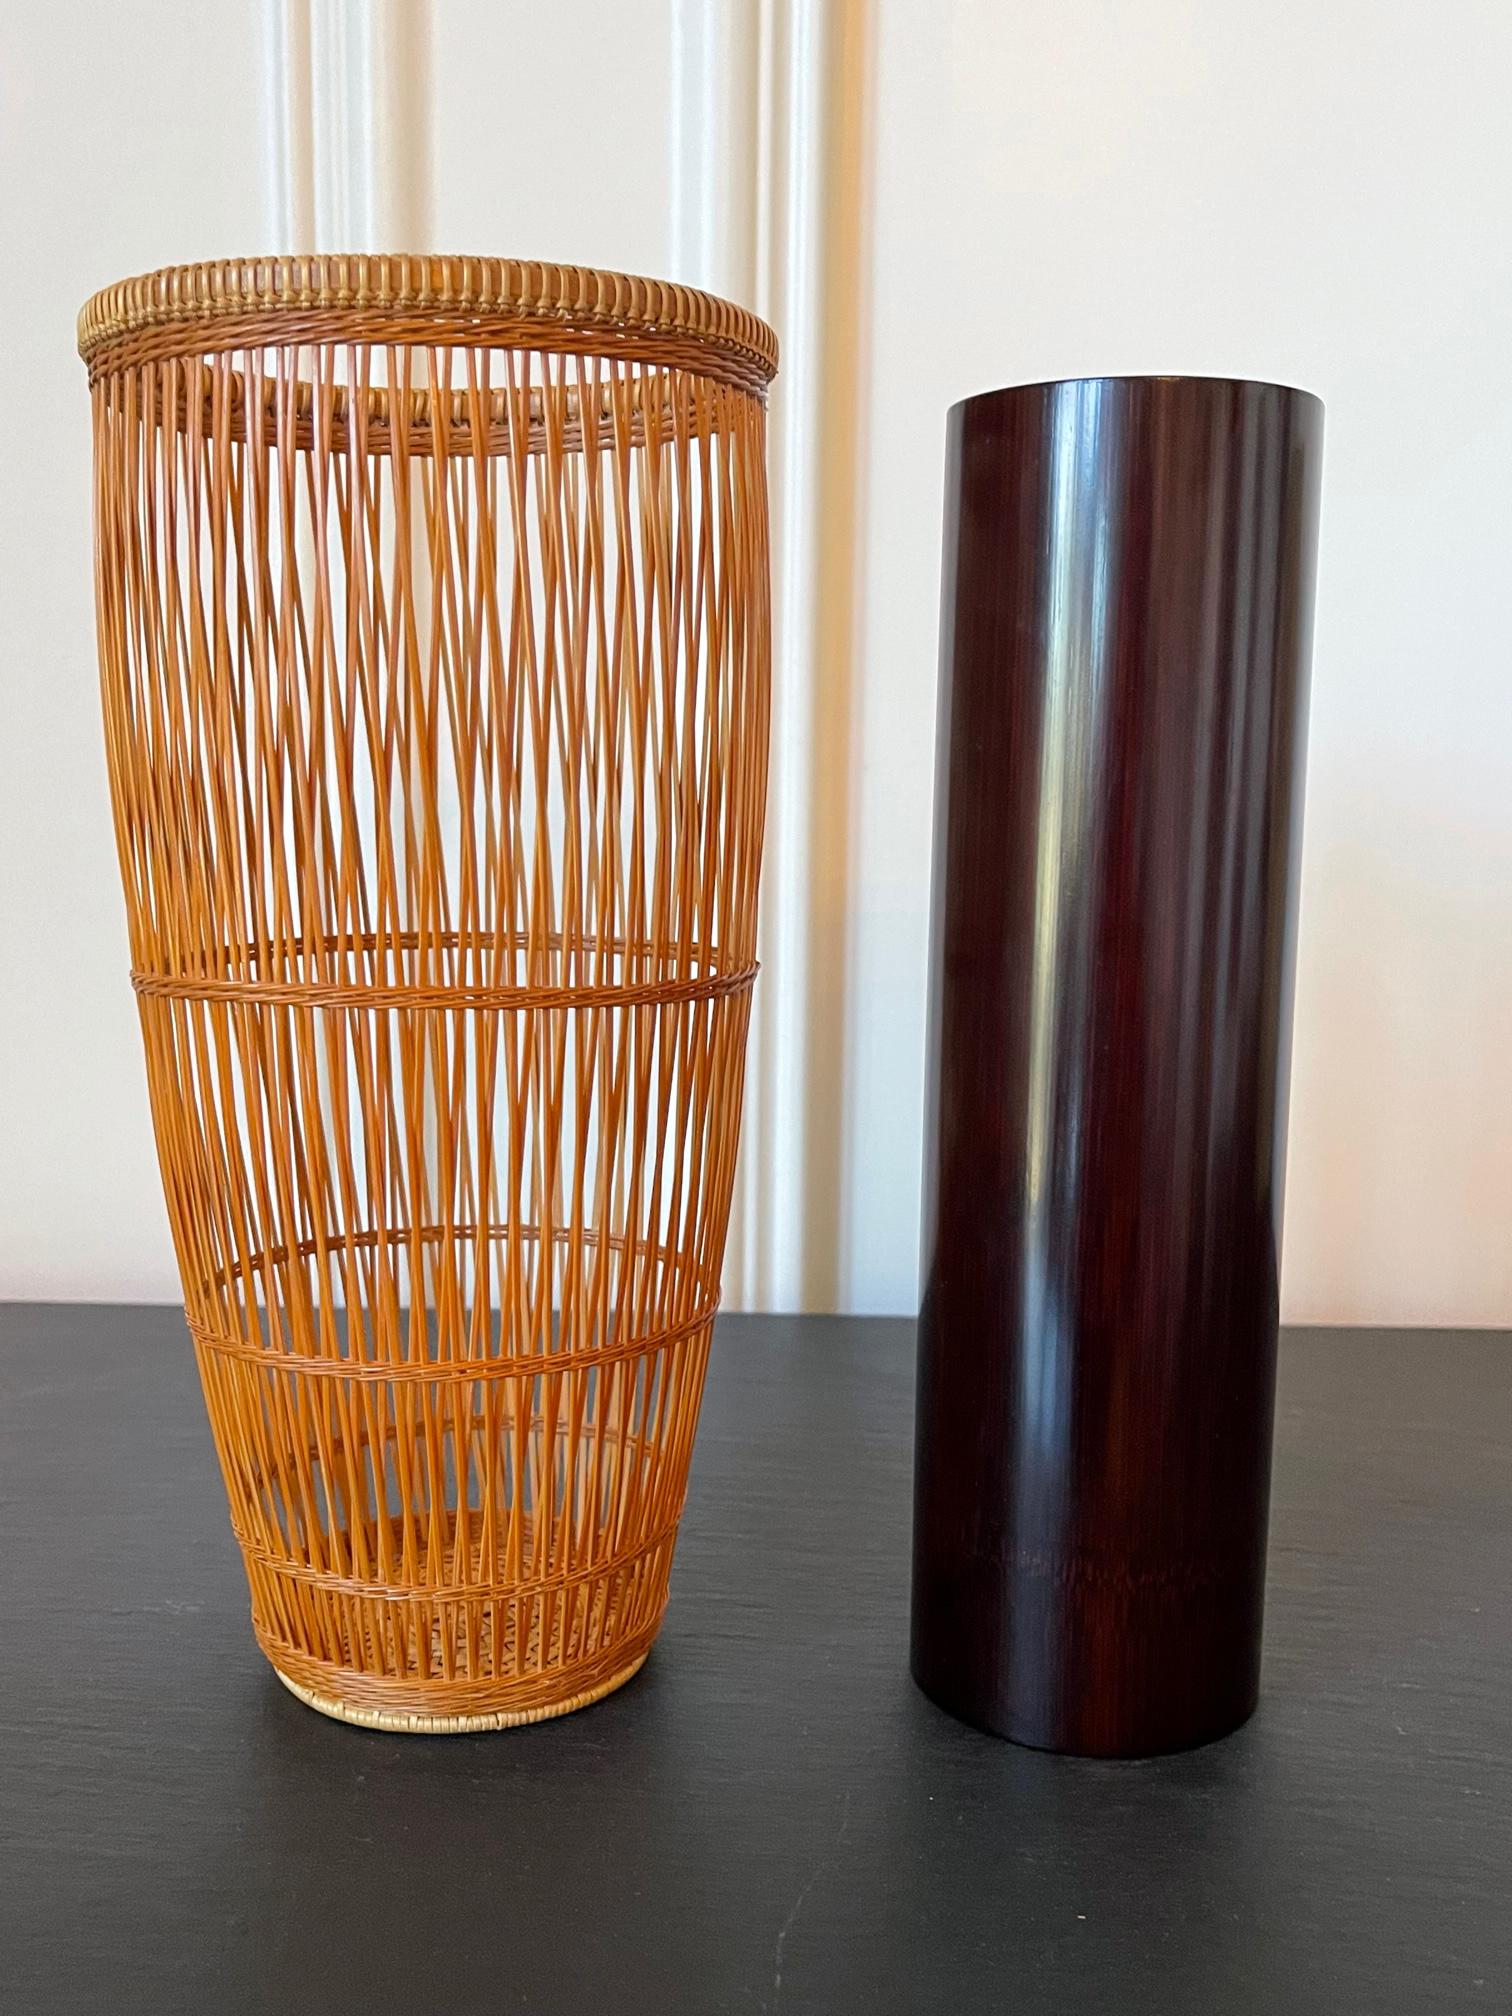 Japanese Contemporary Bamboo Basket by Abe Motoshi In Good Condition For Sale In Atlanta, GA